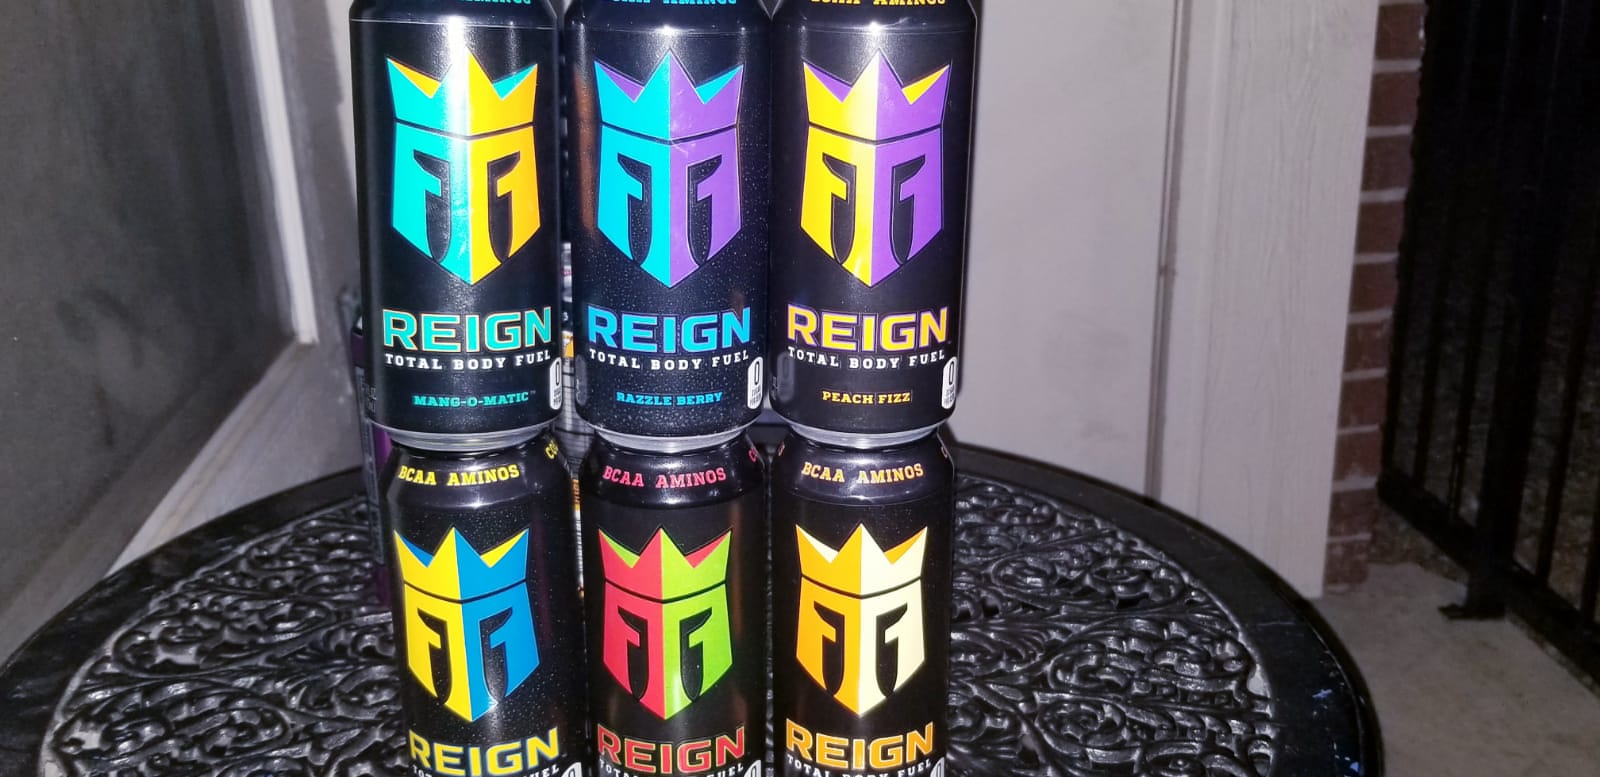 Reign Energy Drink: Demystifying its Caffeine Level & Impact